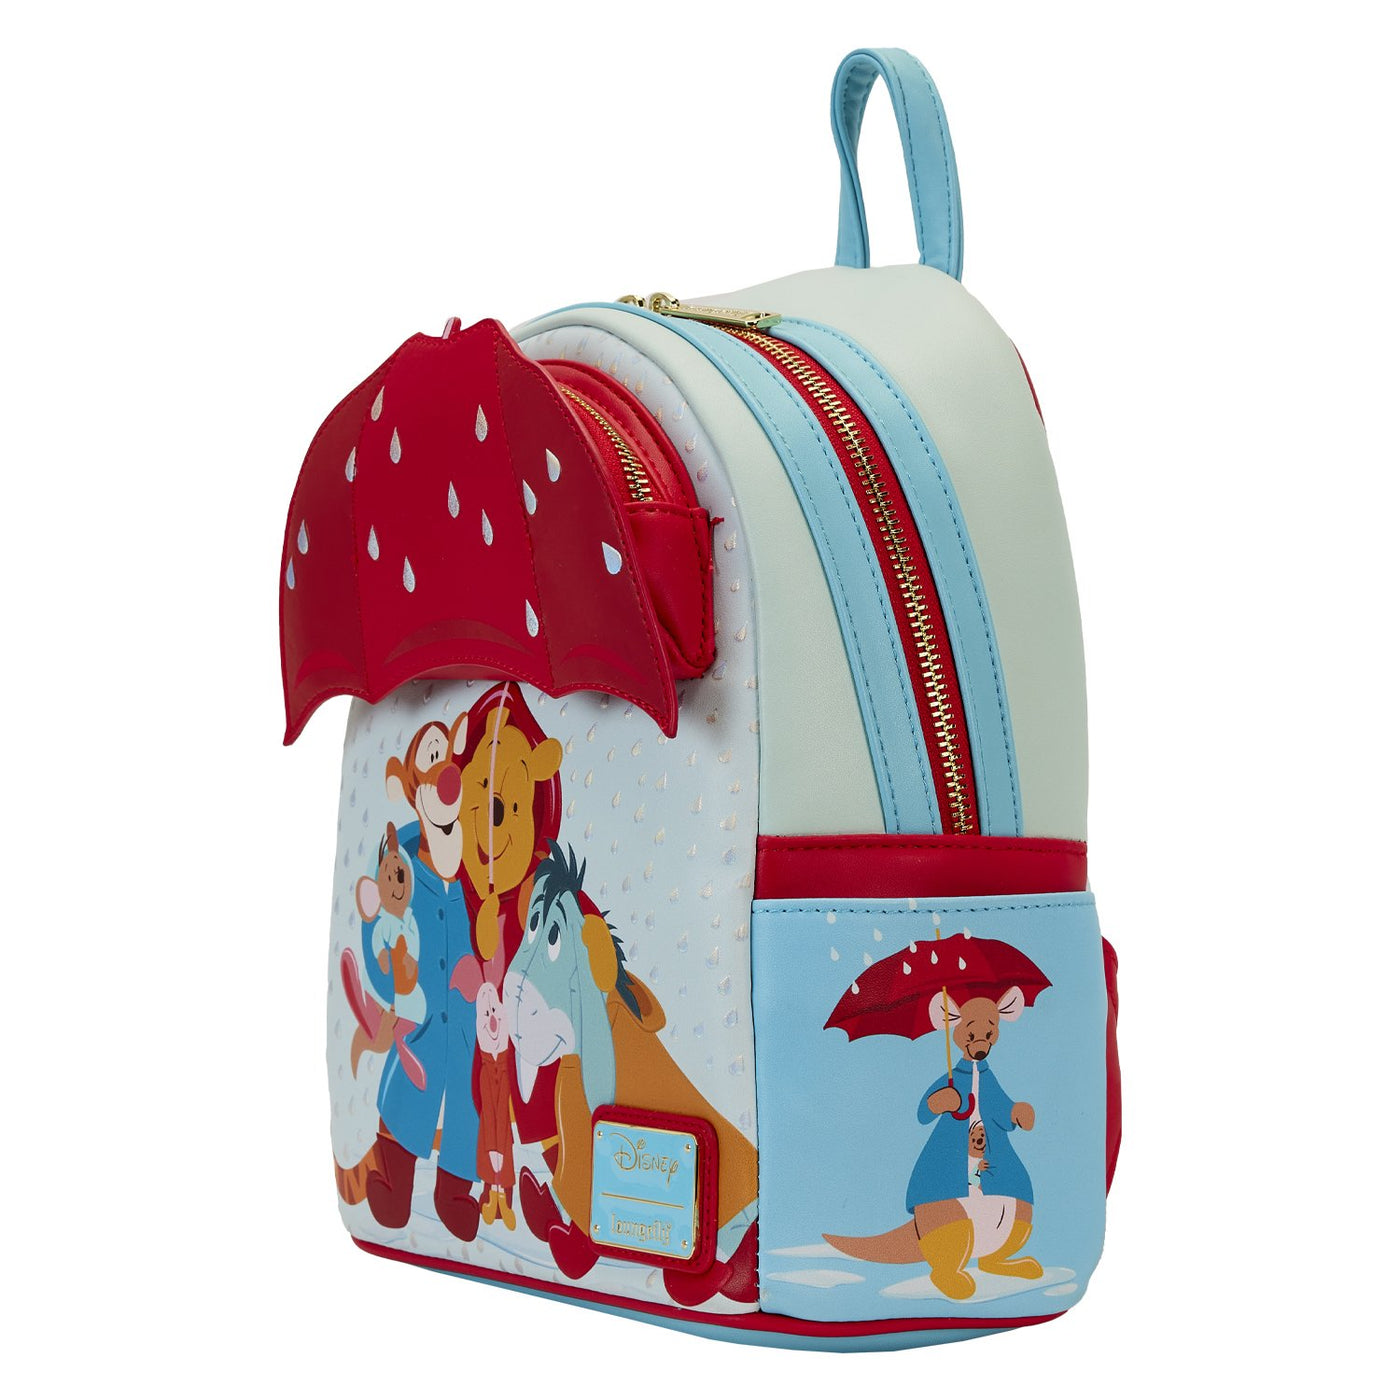 Loungefly Disney Winnie the Pooh and Friends Rainy Day Mini Backpack - Alternate Side View